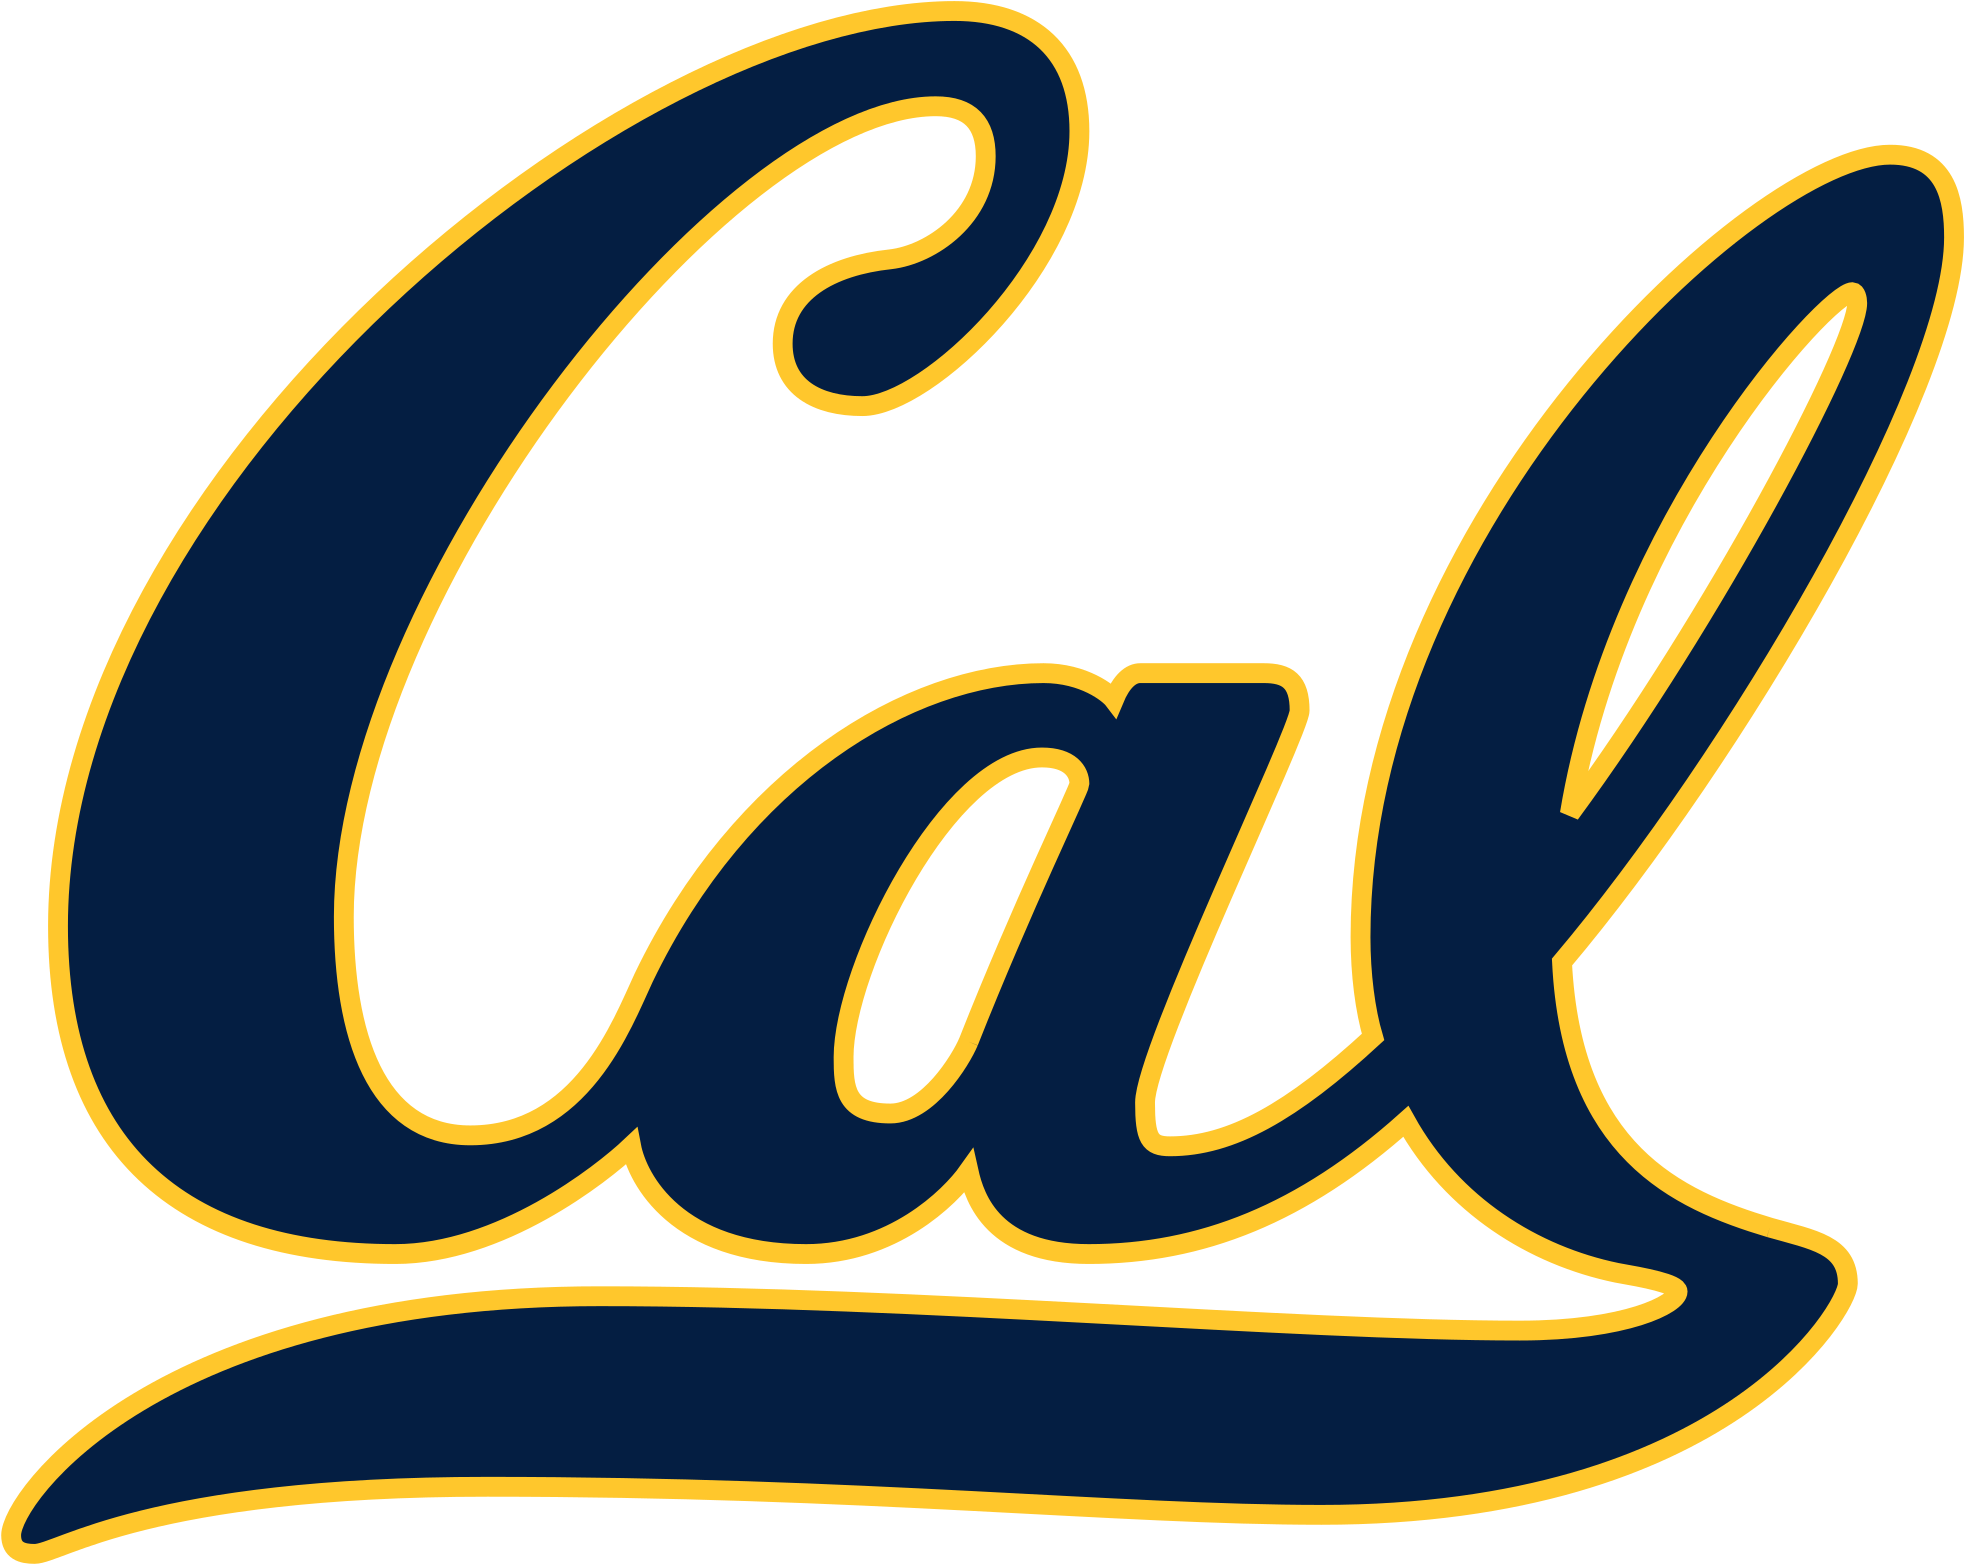 Cal To Offer Gender Inclusive Locker Rooms - Cal Bears (2000x1603)